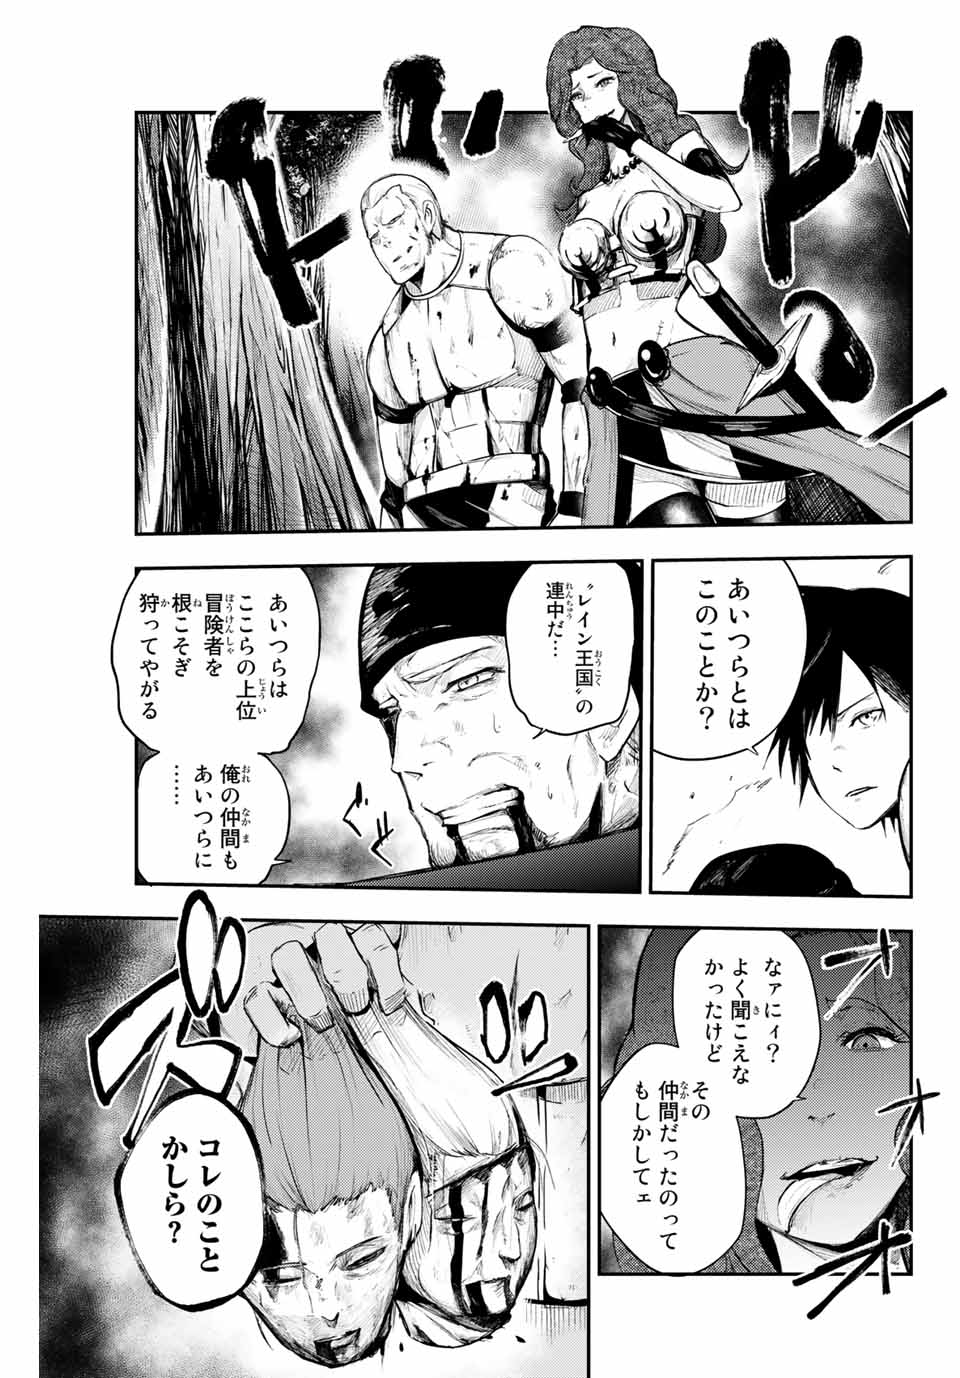 the strongest former prince-; 奴隷転生 ～その奴隷、最強の元王子につき～ 第6話 - Page 15